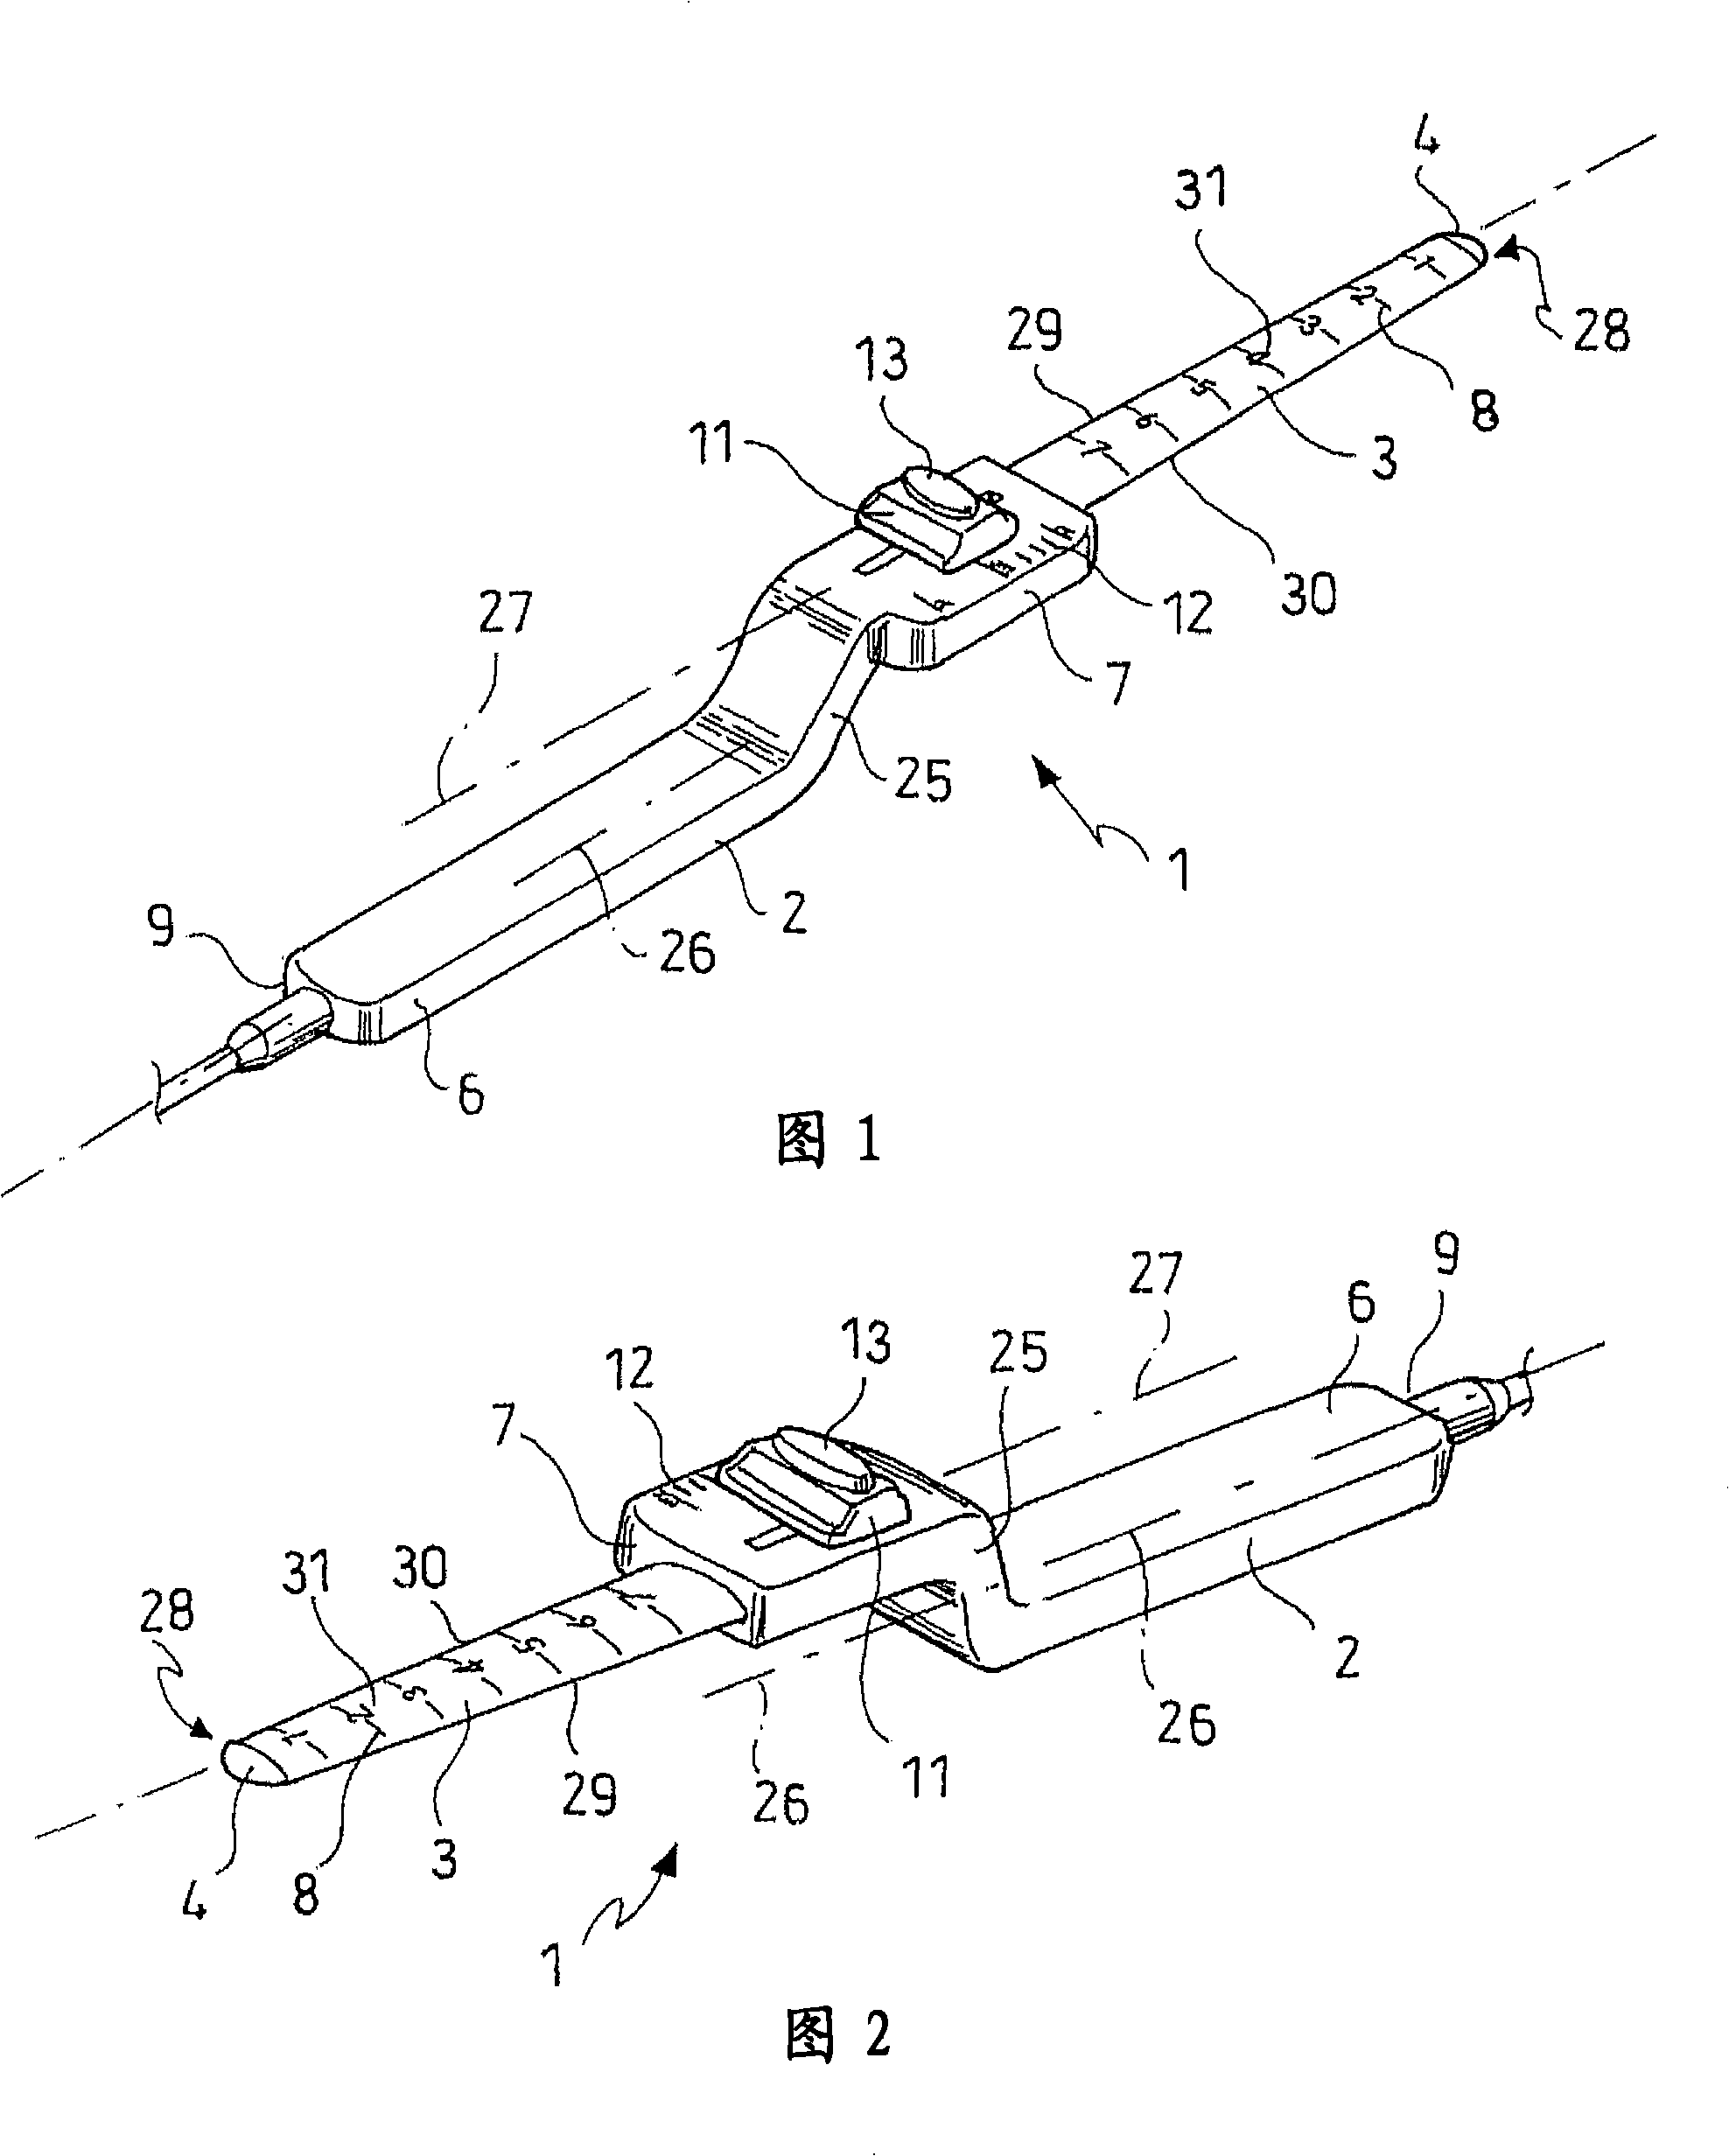 A surgical instrument for performing controlled myotomies